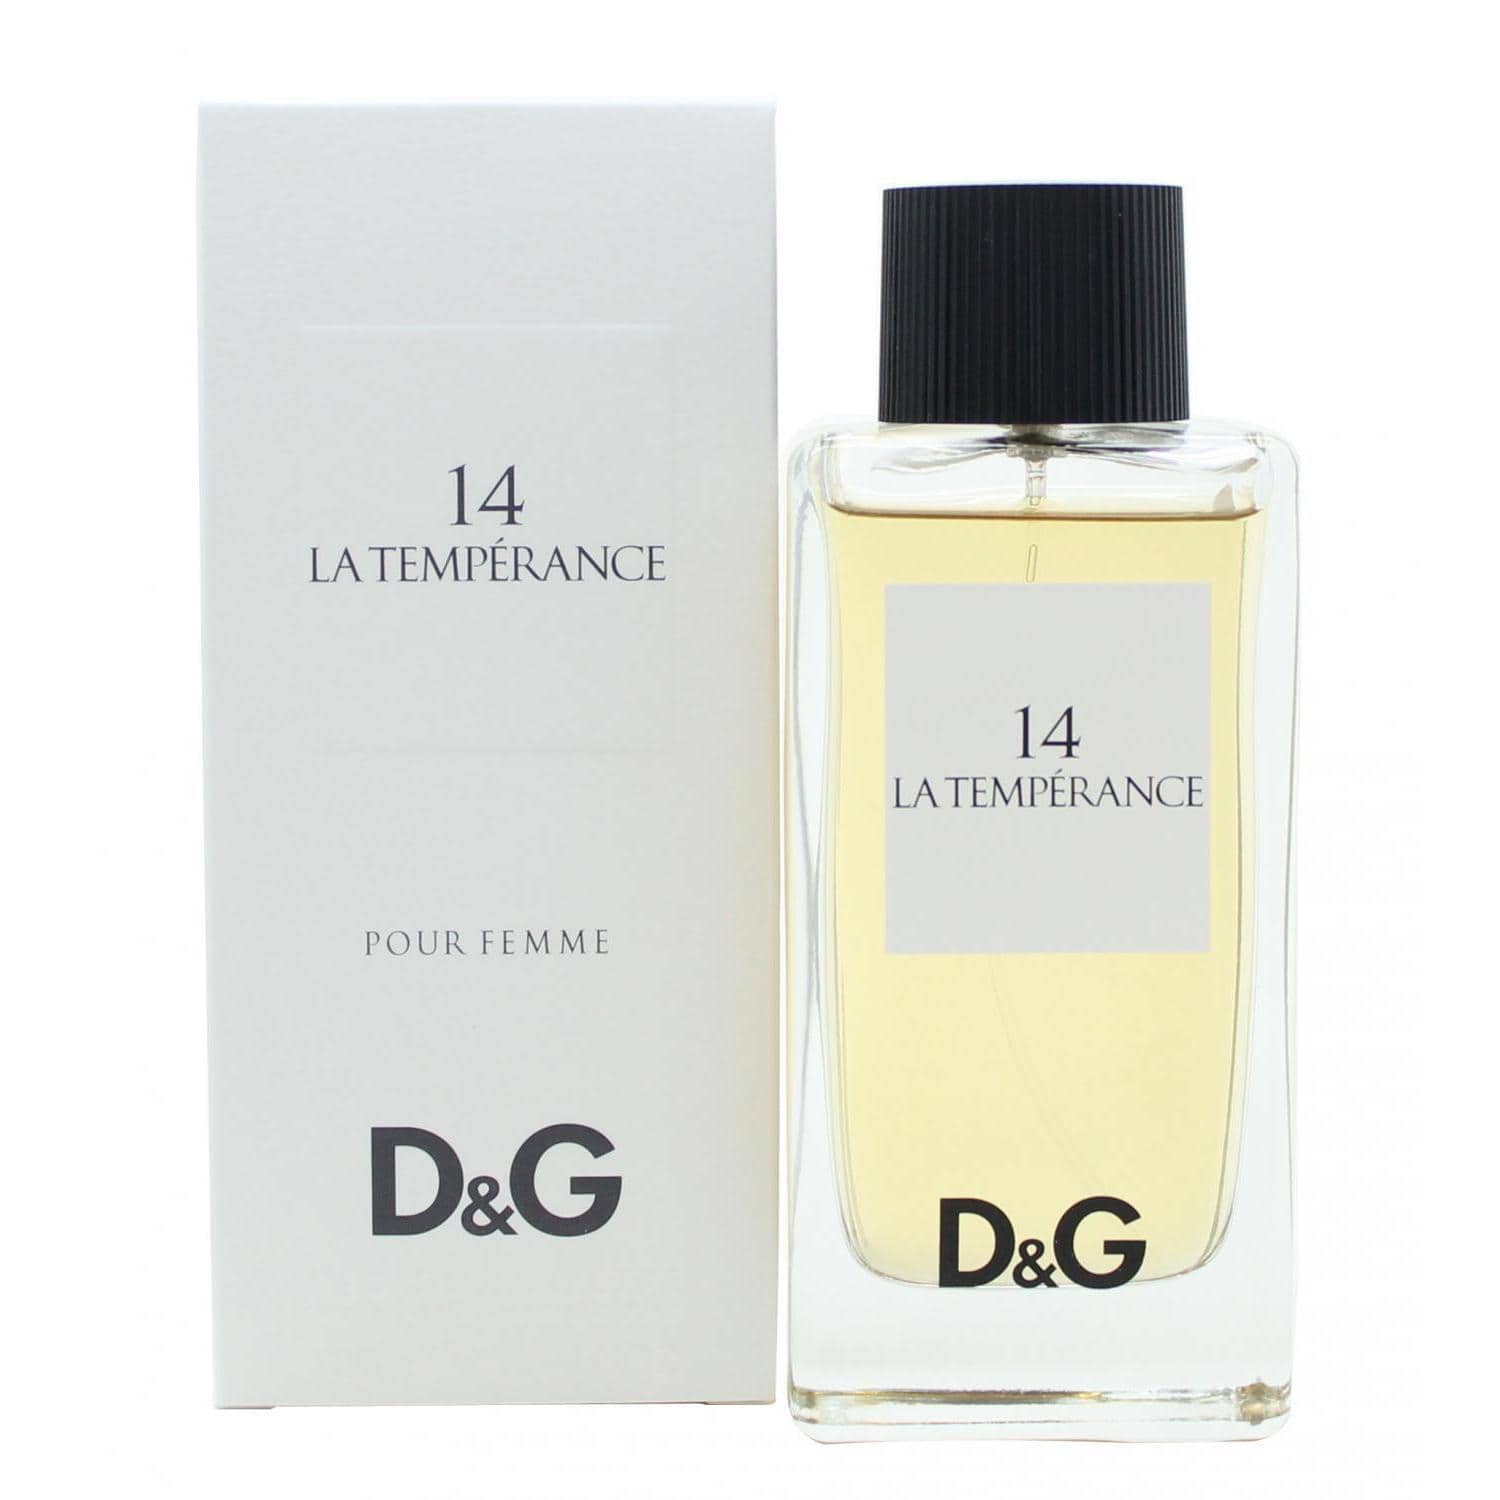 La Temperance 14 by Dolce &amp; Gabbana Perfume. Fall under the spell of La Temperance 14, a captivating women's fragrance with the cachet of Dolce &amp; Gabanna and a unique source of inspiration. A deck of tarot cards provides a reference for entries in the D &amp; G Anthology series. Temperance is represented by the spellbinding 2009 release from the luxury Italian label, La Temperance 14. Its subtle seduction is achieved by accenting a romantic bouquet of rose, hibiscus and iris with musky ambrette and rosy pink pepper.